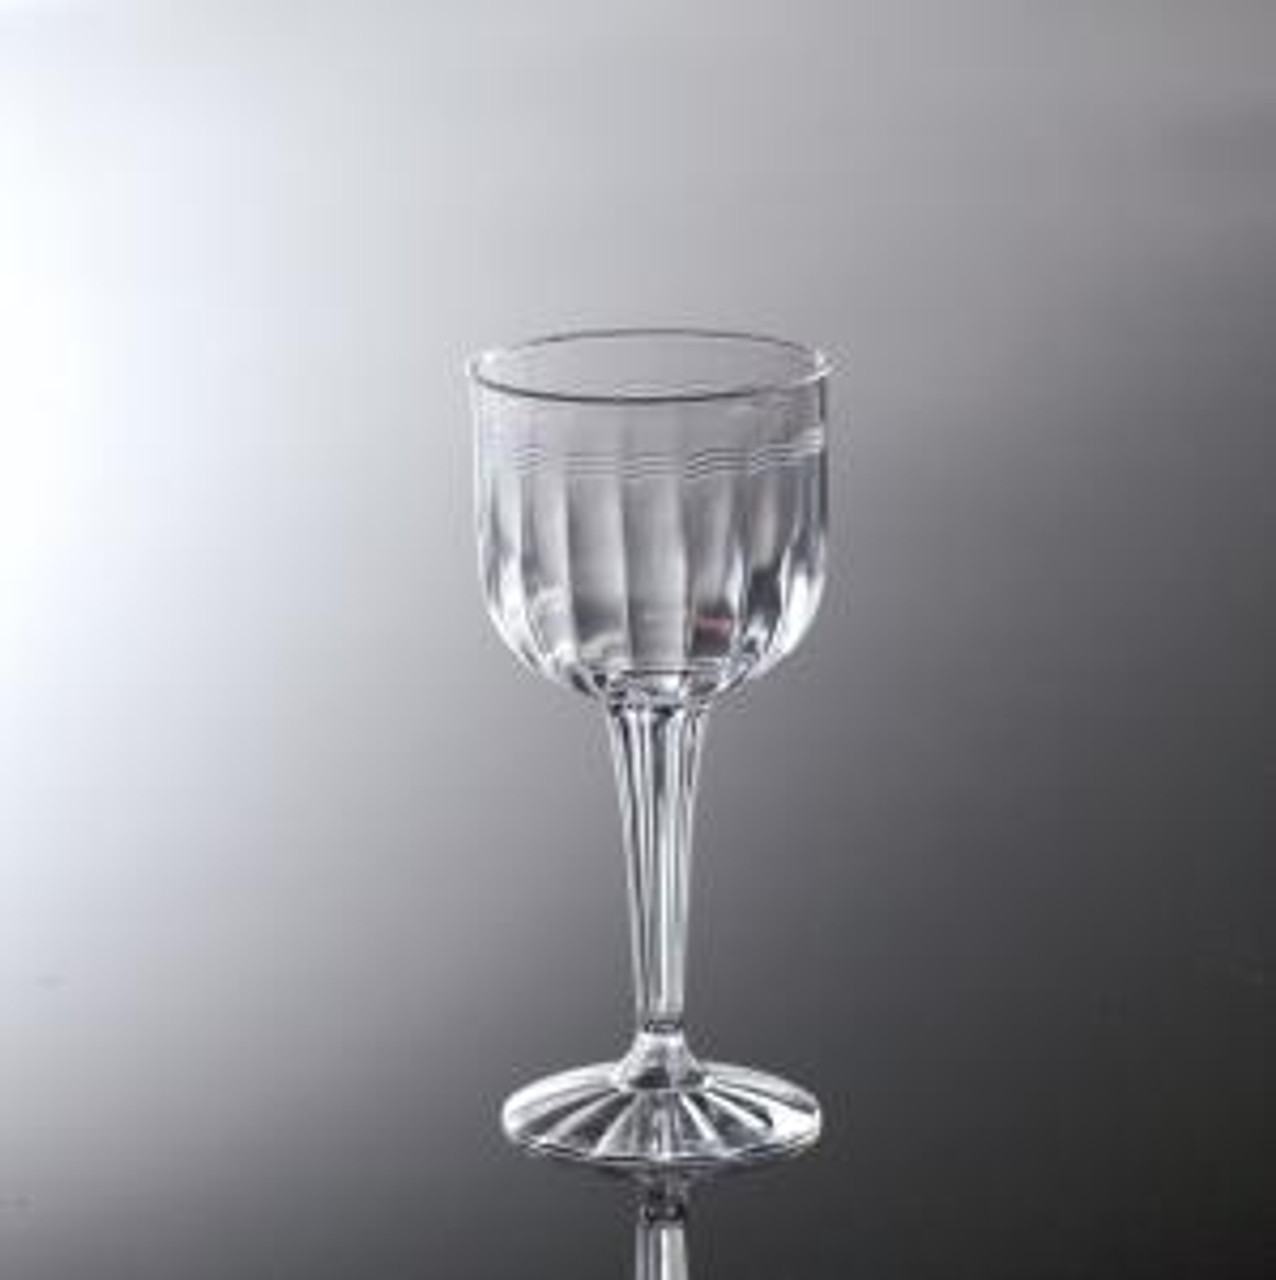 https://cdn11.bigcommerce.com/s-hgqmwywp99/images/stencil/1280x1280/products/49799/44586/clear-plastic-8oz-wine-goblets-1pc-8pk-15__89565.1675880351.jpg?c=1?imbypass=on